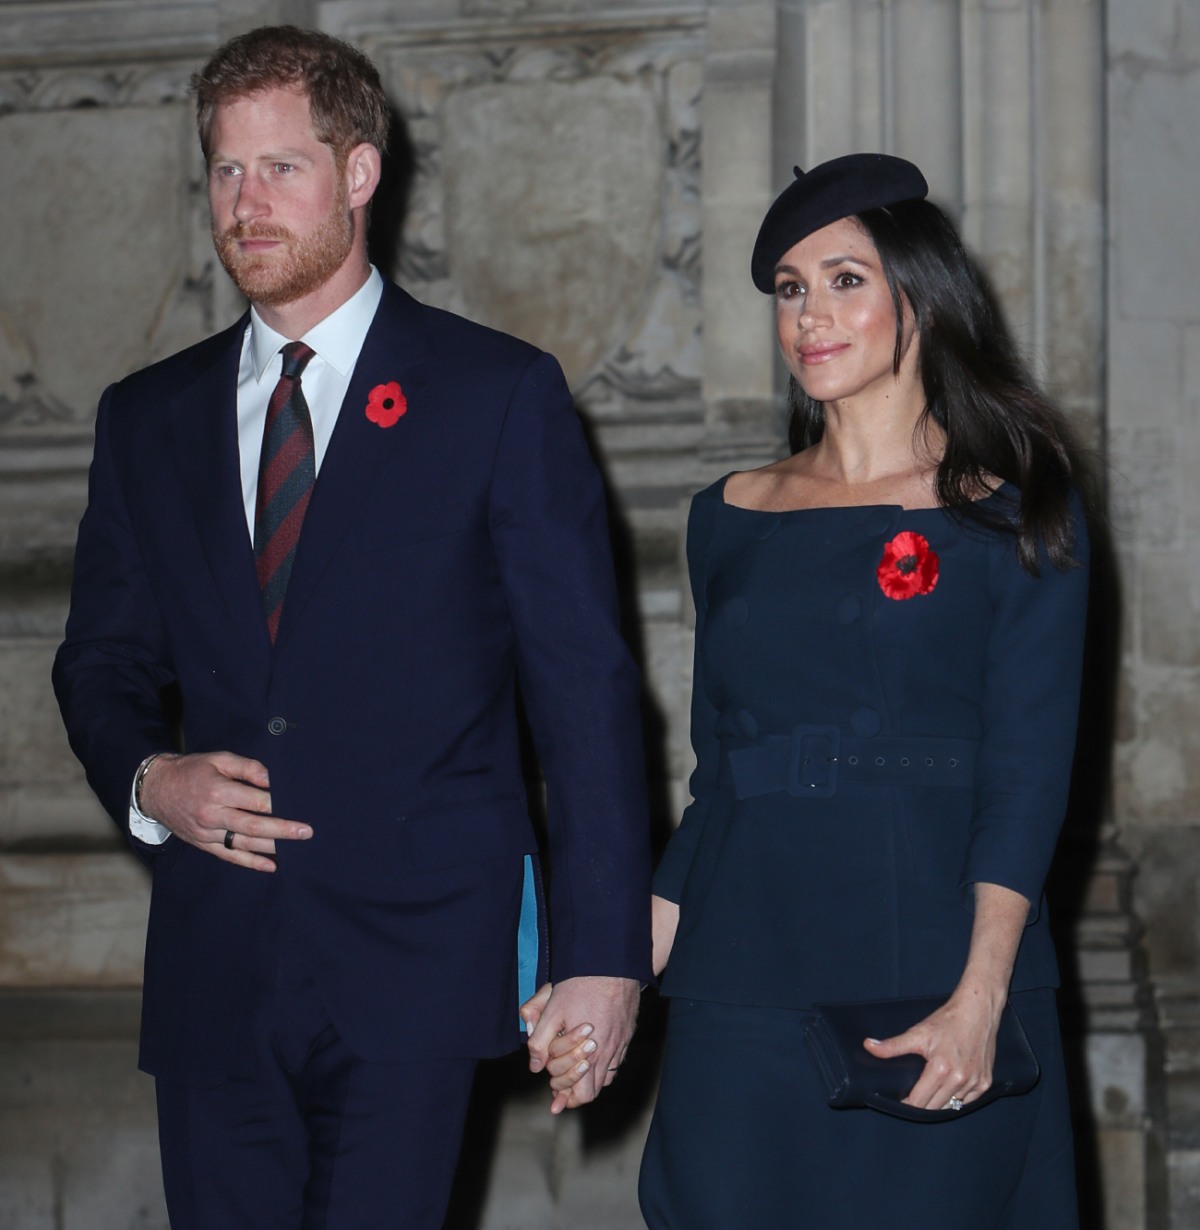 The Royal Family attends a Service to commemorate the Armistice on the centenary of the end of WWI